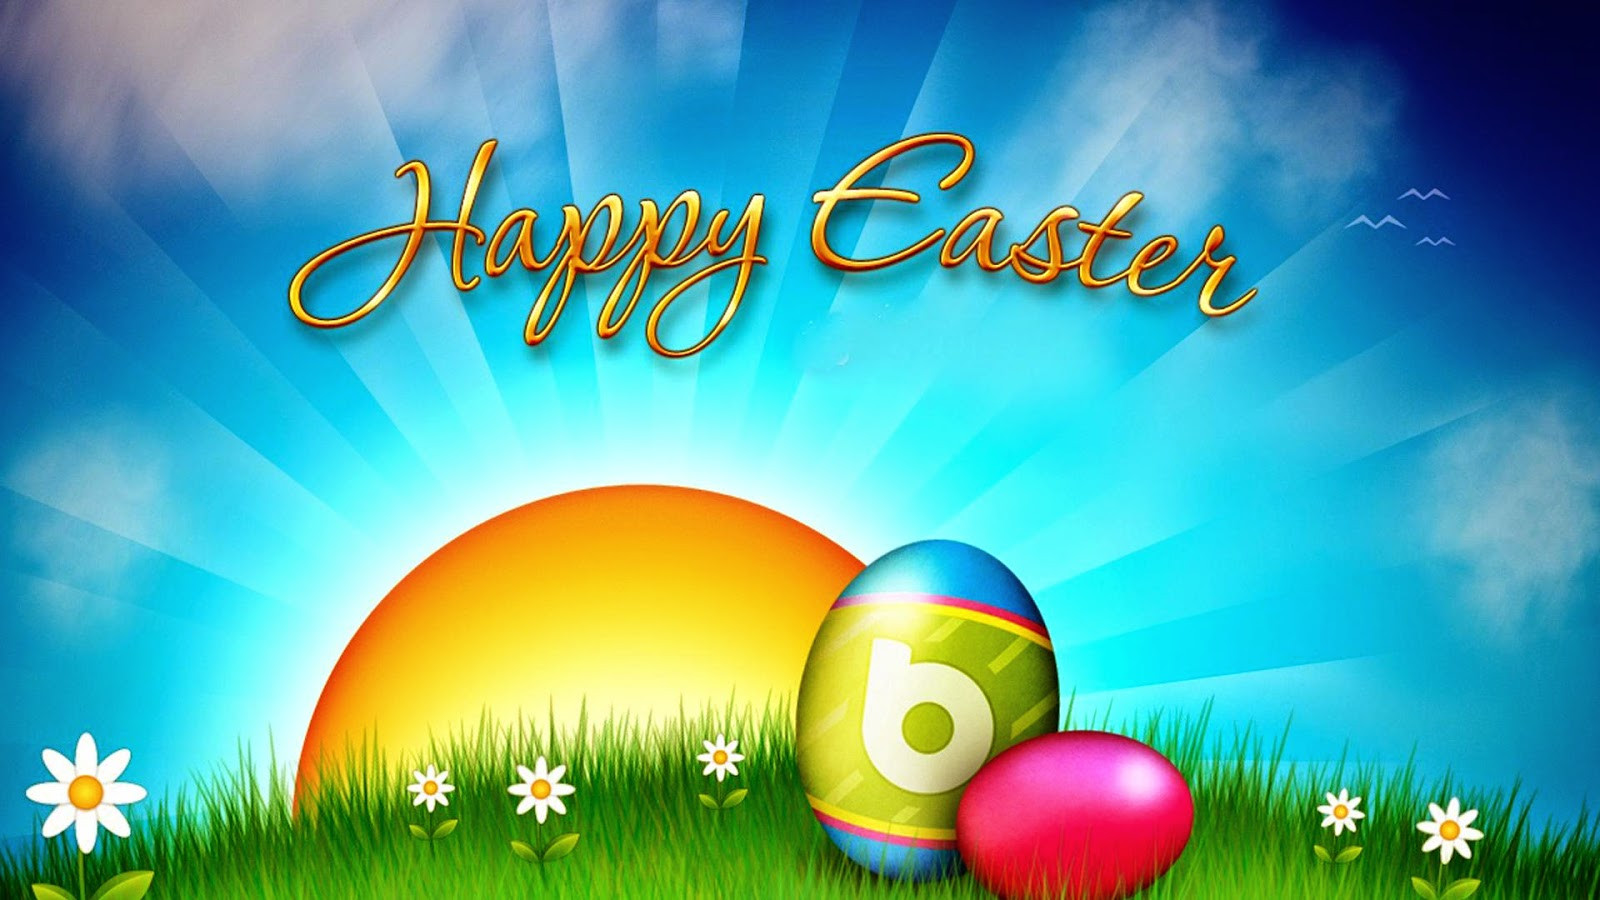 Happy Easter Quotes And Images
 Easter Quotes And Sayings QuotesGram